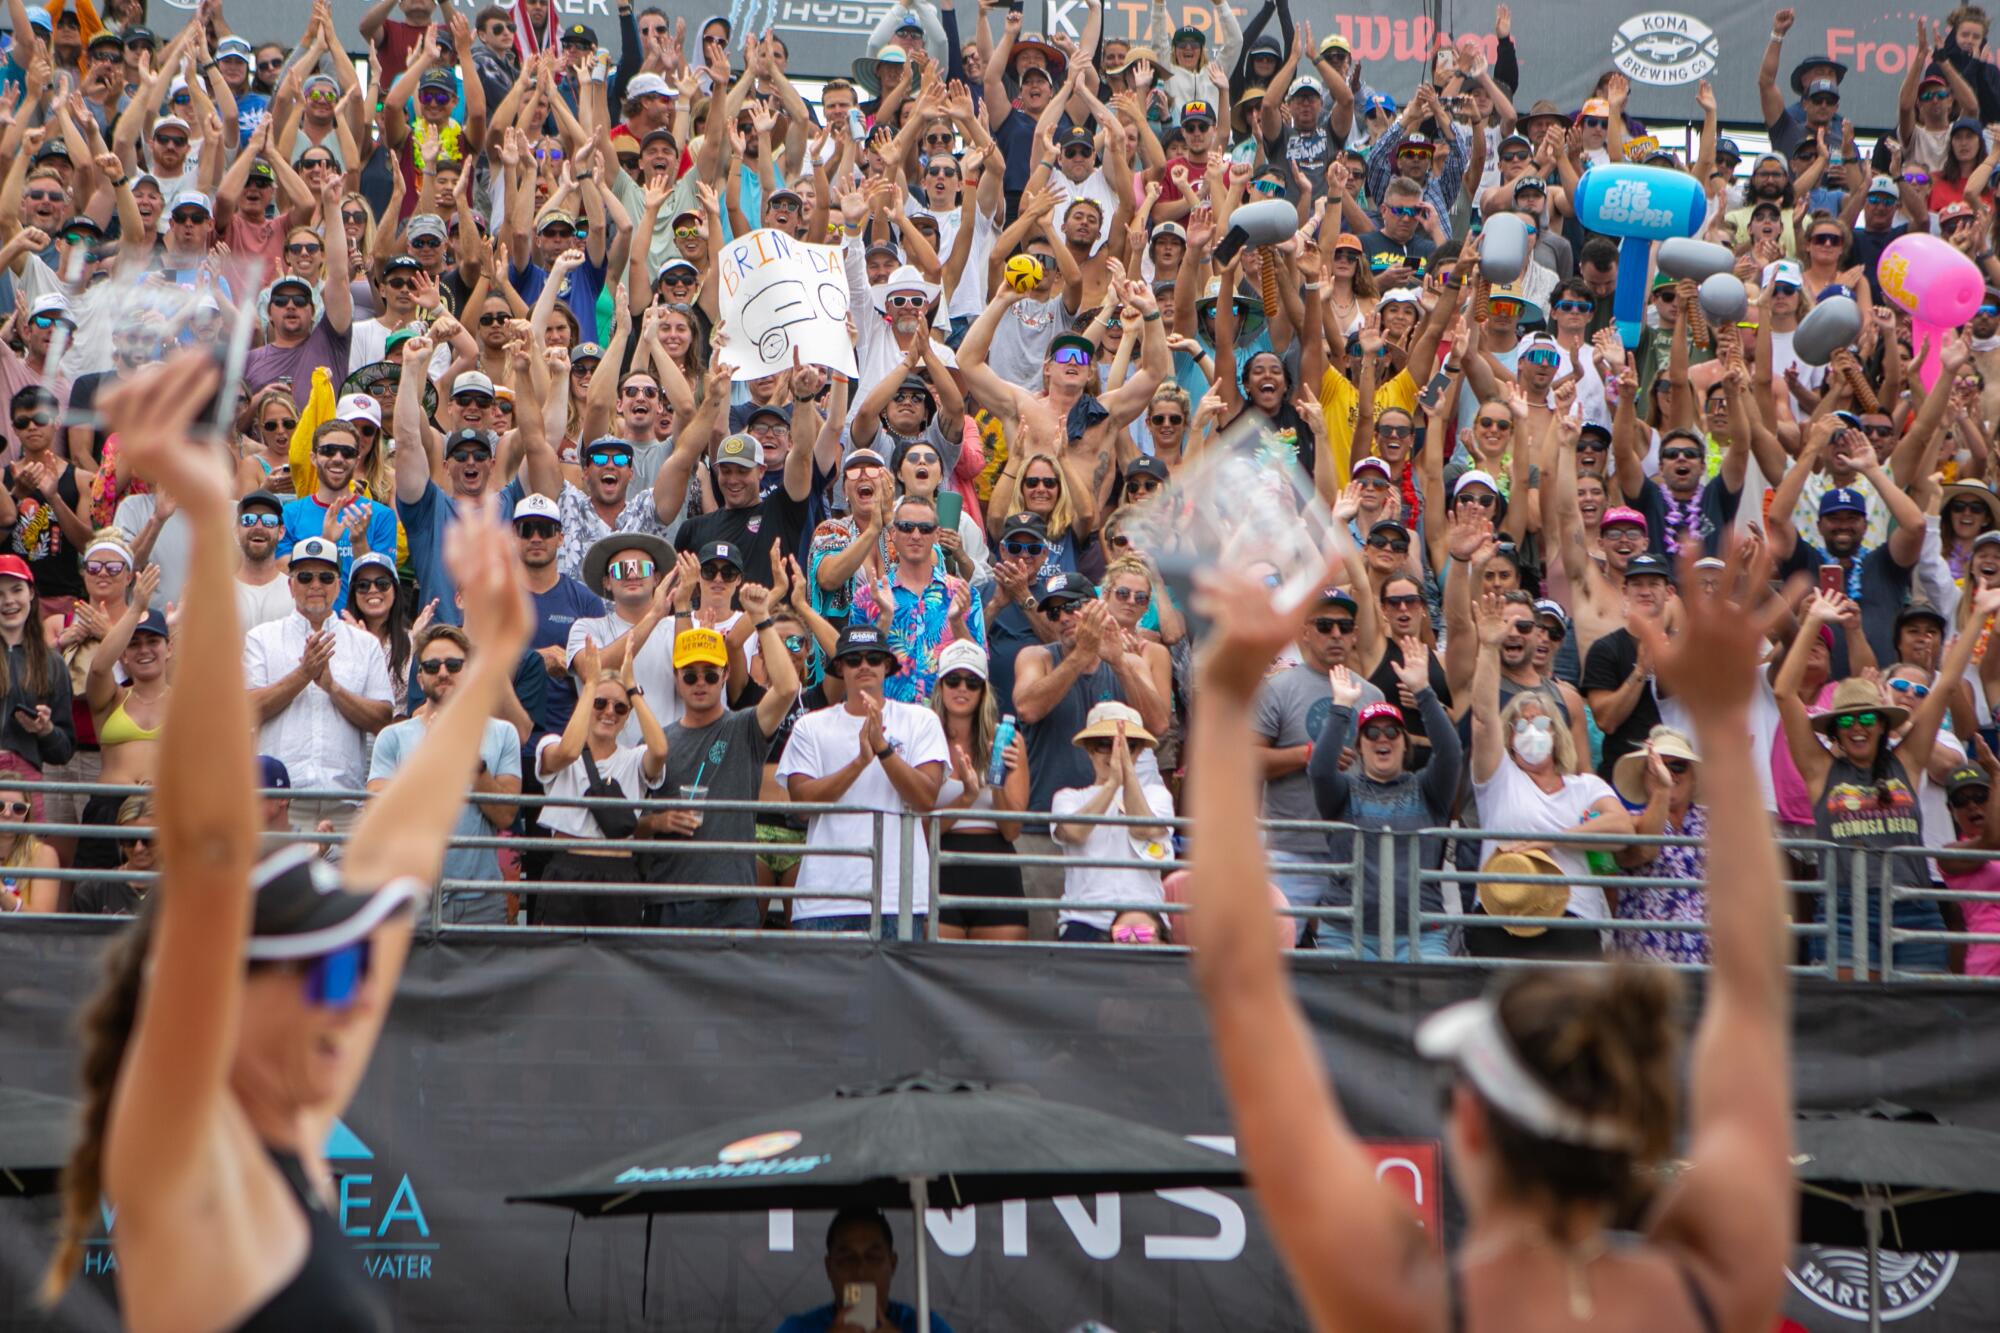 Terese Cannon and Sarah Sponcil raise their arms after winning the AVP Hermosa Beach Open.